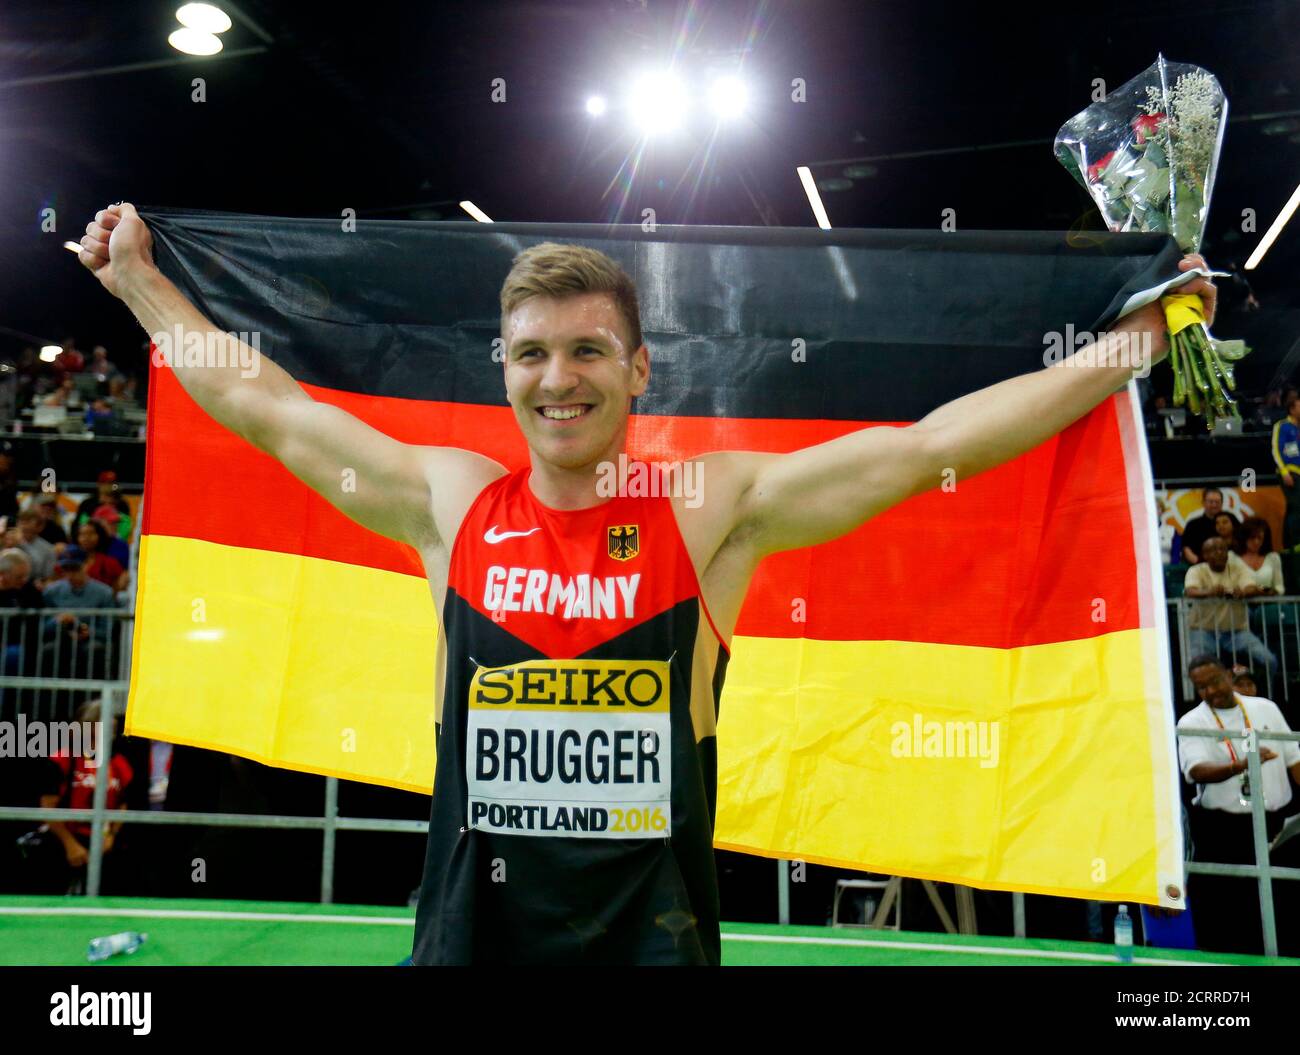 Mathias Brugger of Germany celebrates with his country's flag after winning the bronze medal in the men's heptathlon during the IAAF World Indoor Athletics Championships in Portland, Oregon March 19, 2016.  REUTERS/Mike Blake Stock Photo